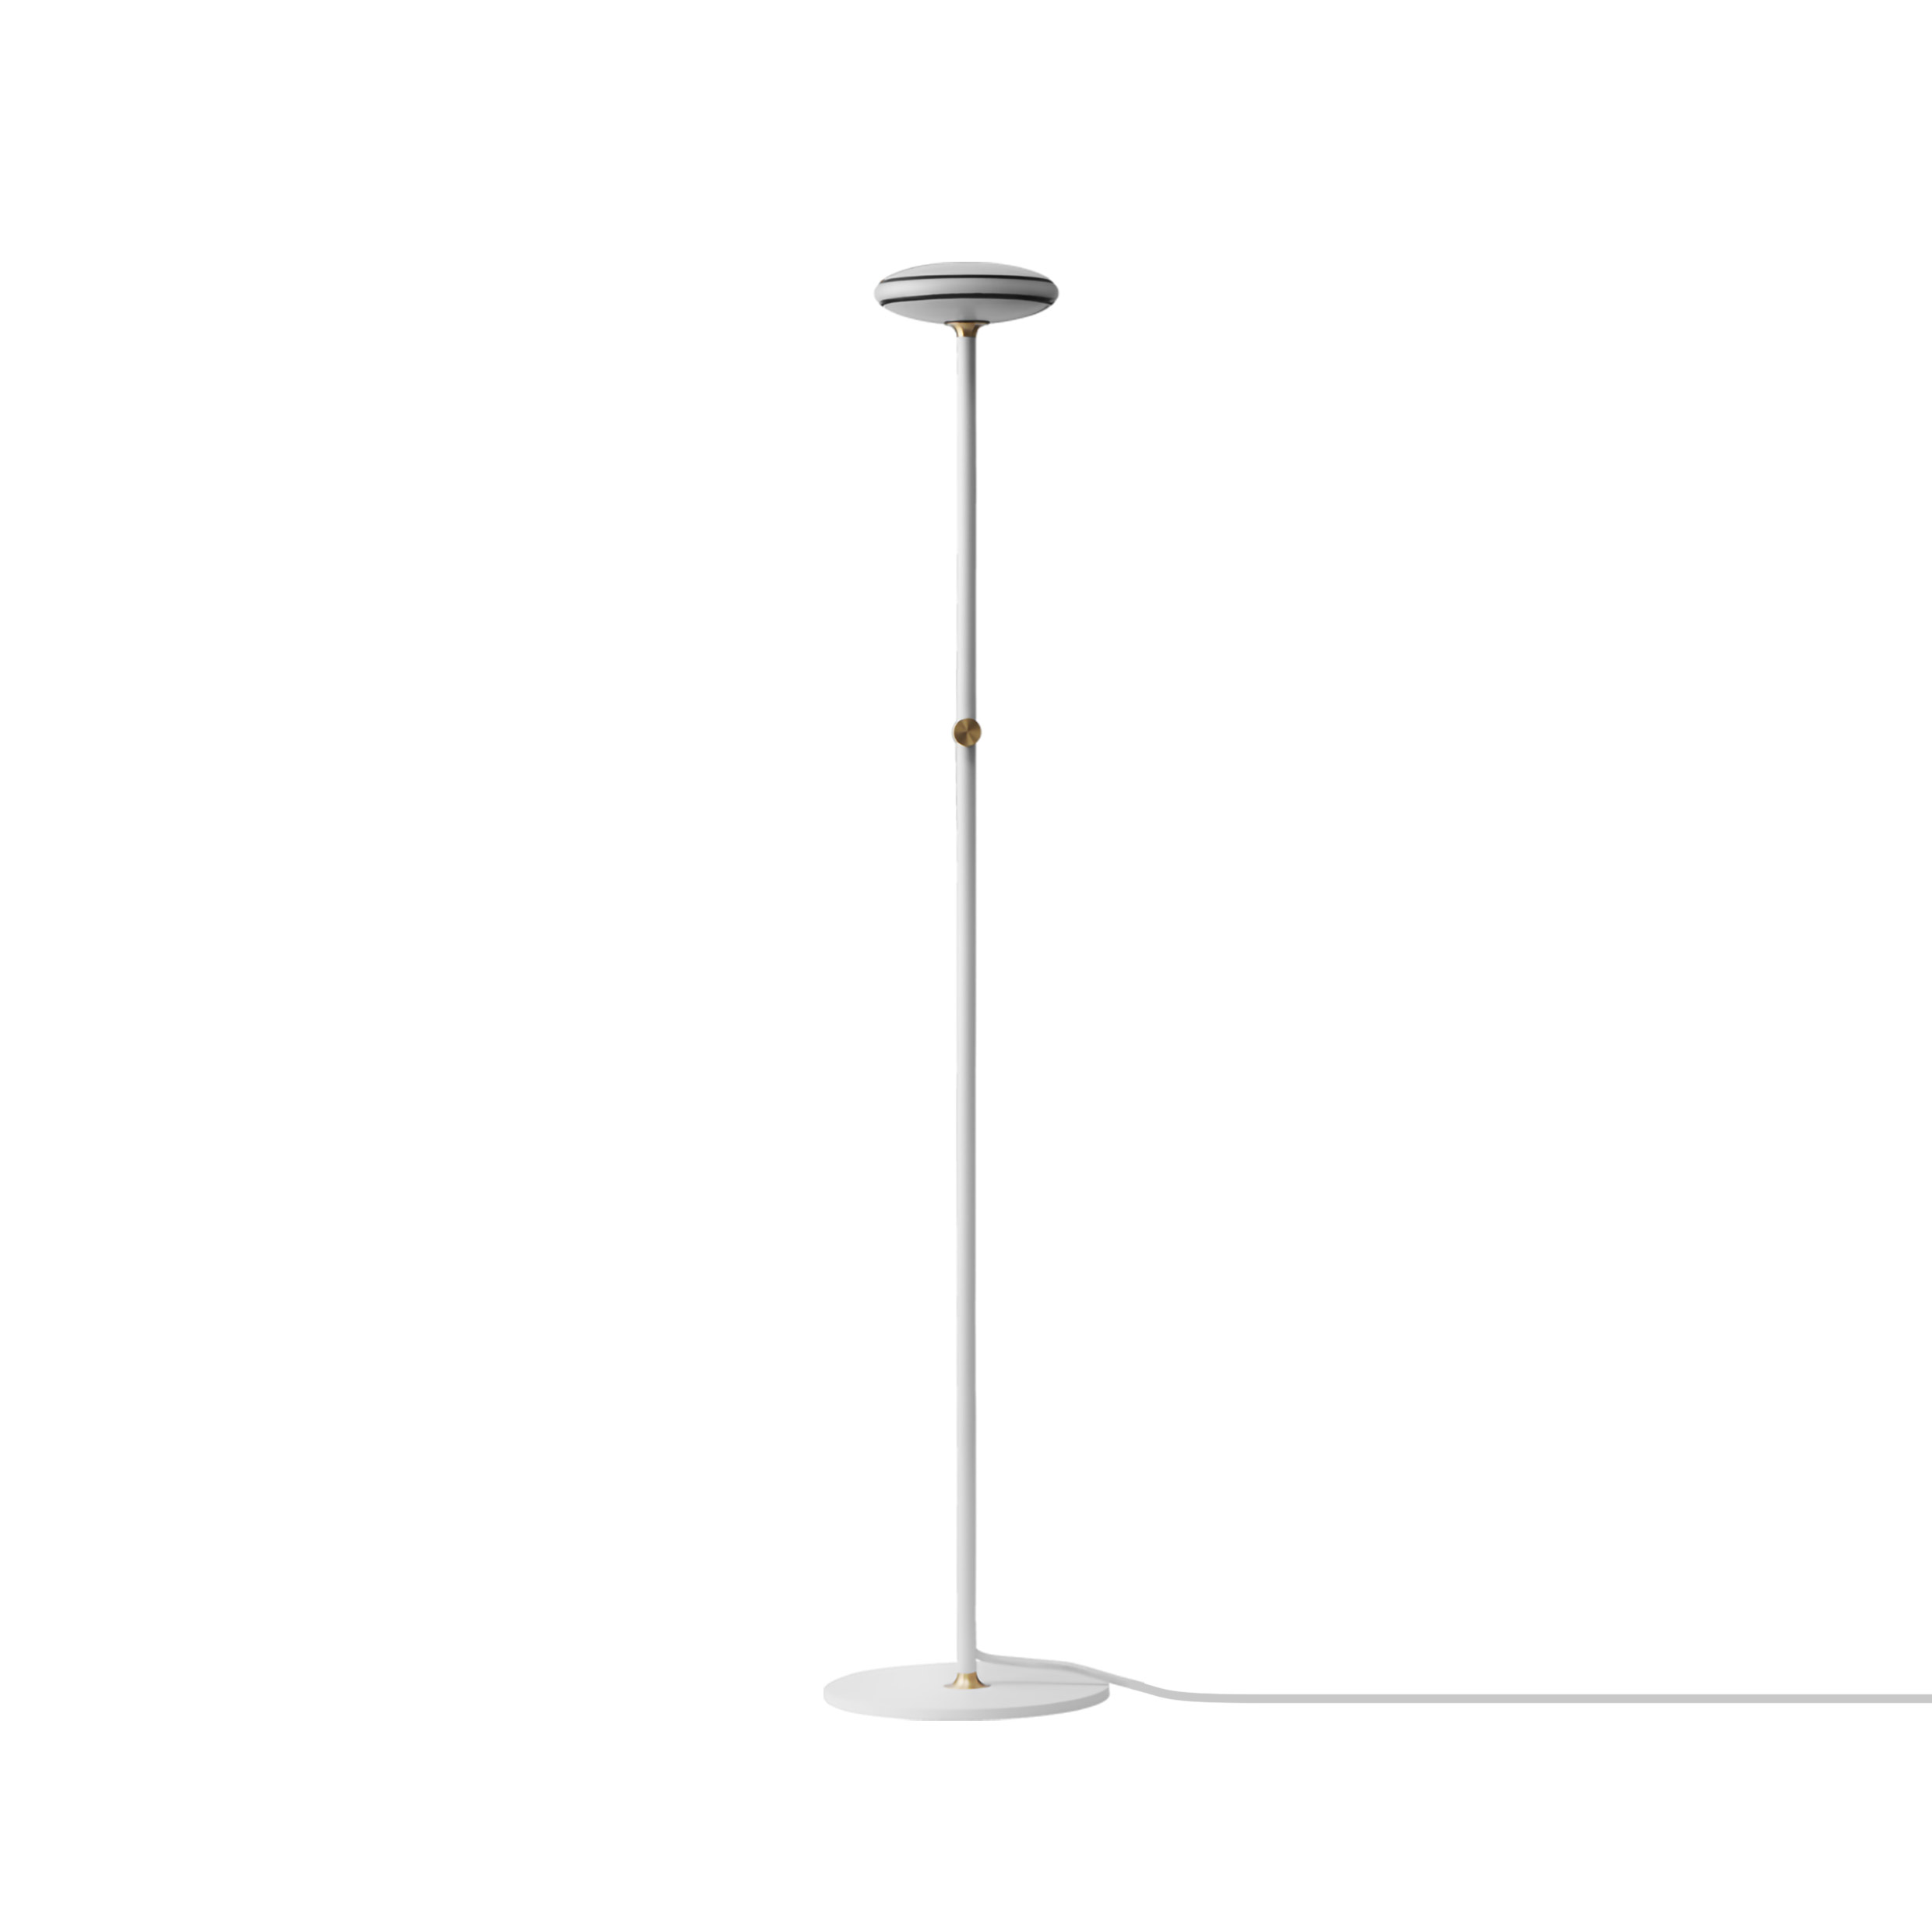 SHADE // ØS1 - FLOOR LAMP | SMART LED LIGHT - WHITE - WITH REMOTE CONTROL